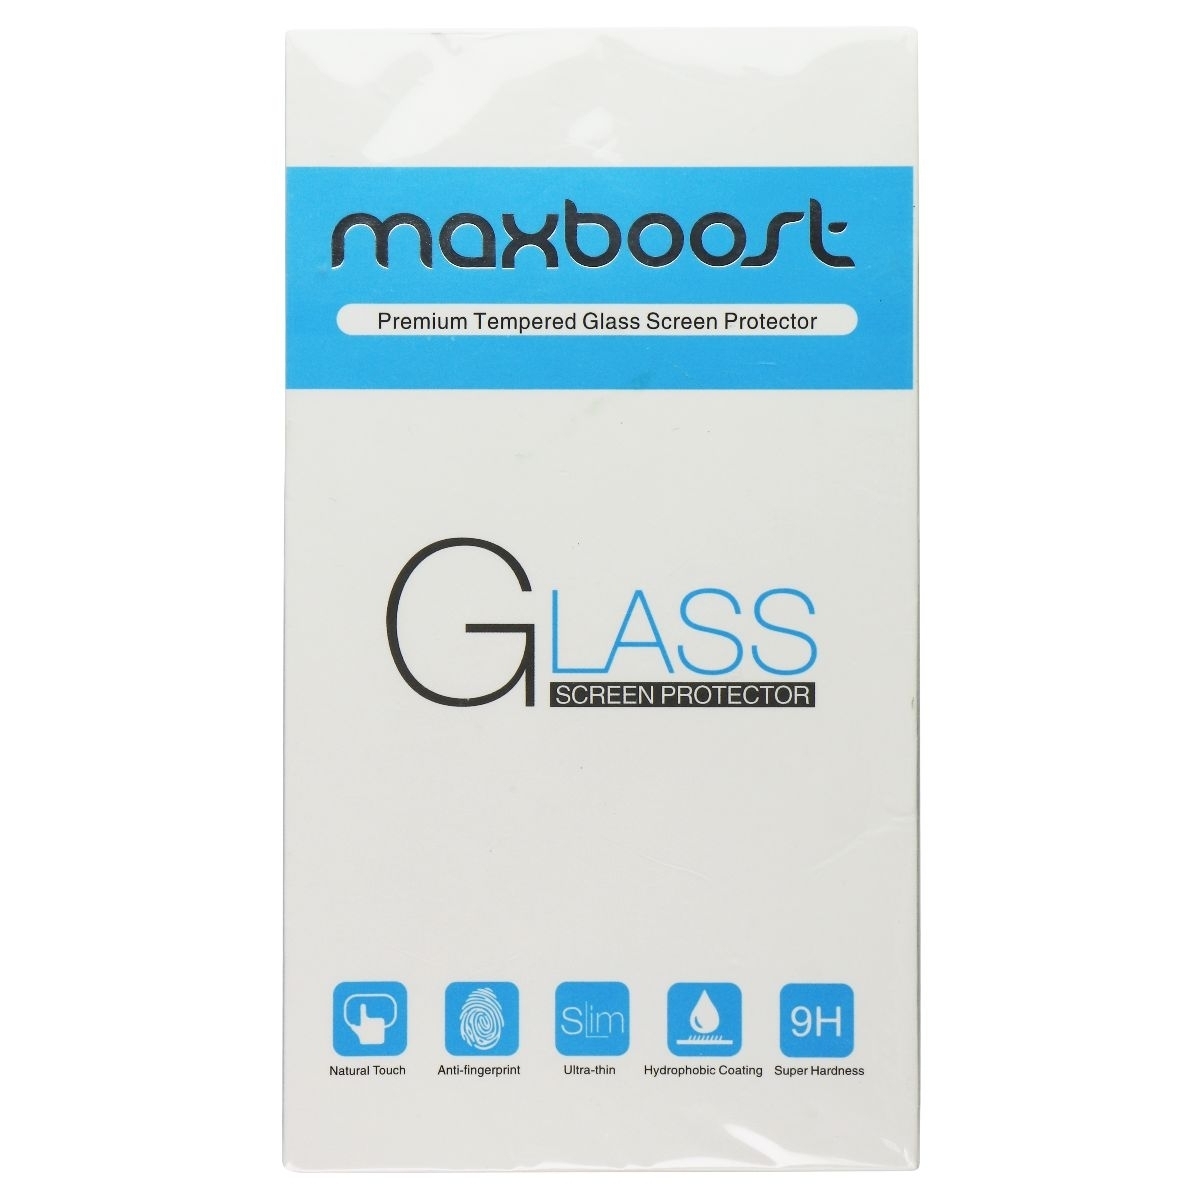 Maxboost Premium Tempered Glass Screen Protector For Apple IPhone X - Clear (Refurbished)